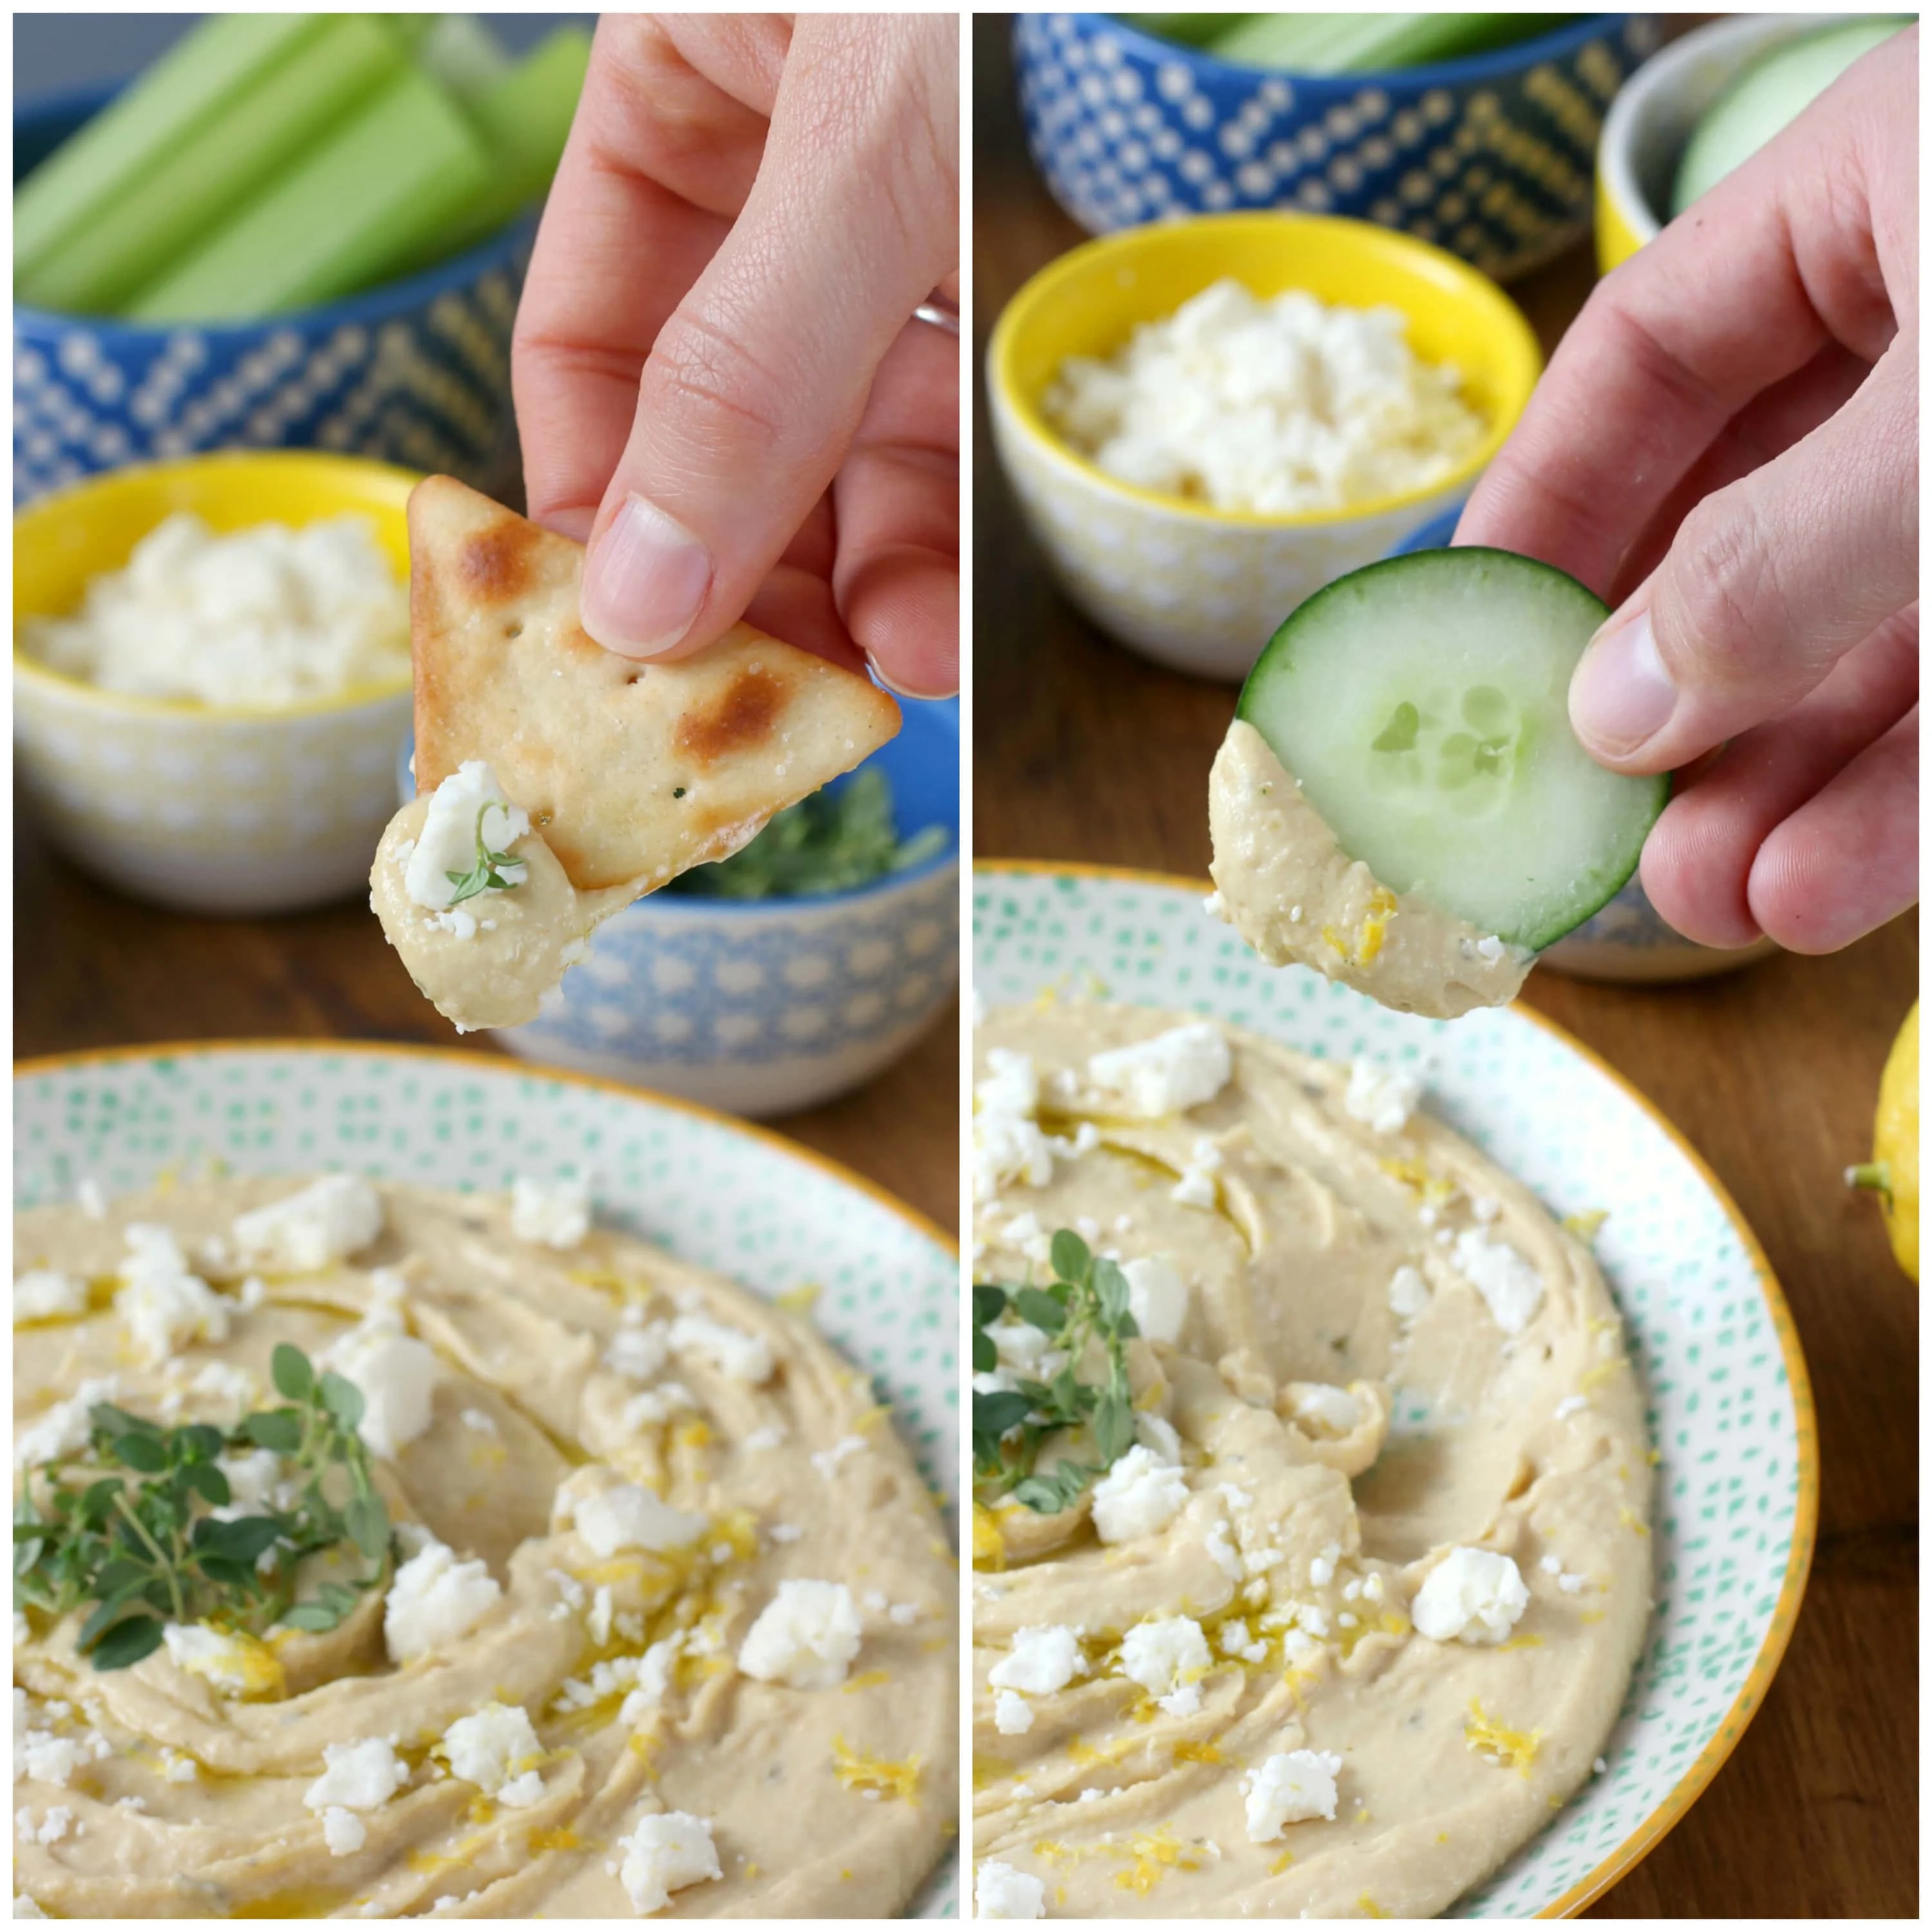 Lemon Thyme Hummus with Feta for a quick snack